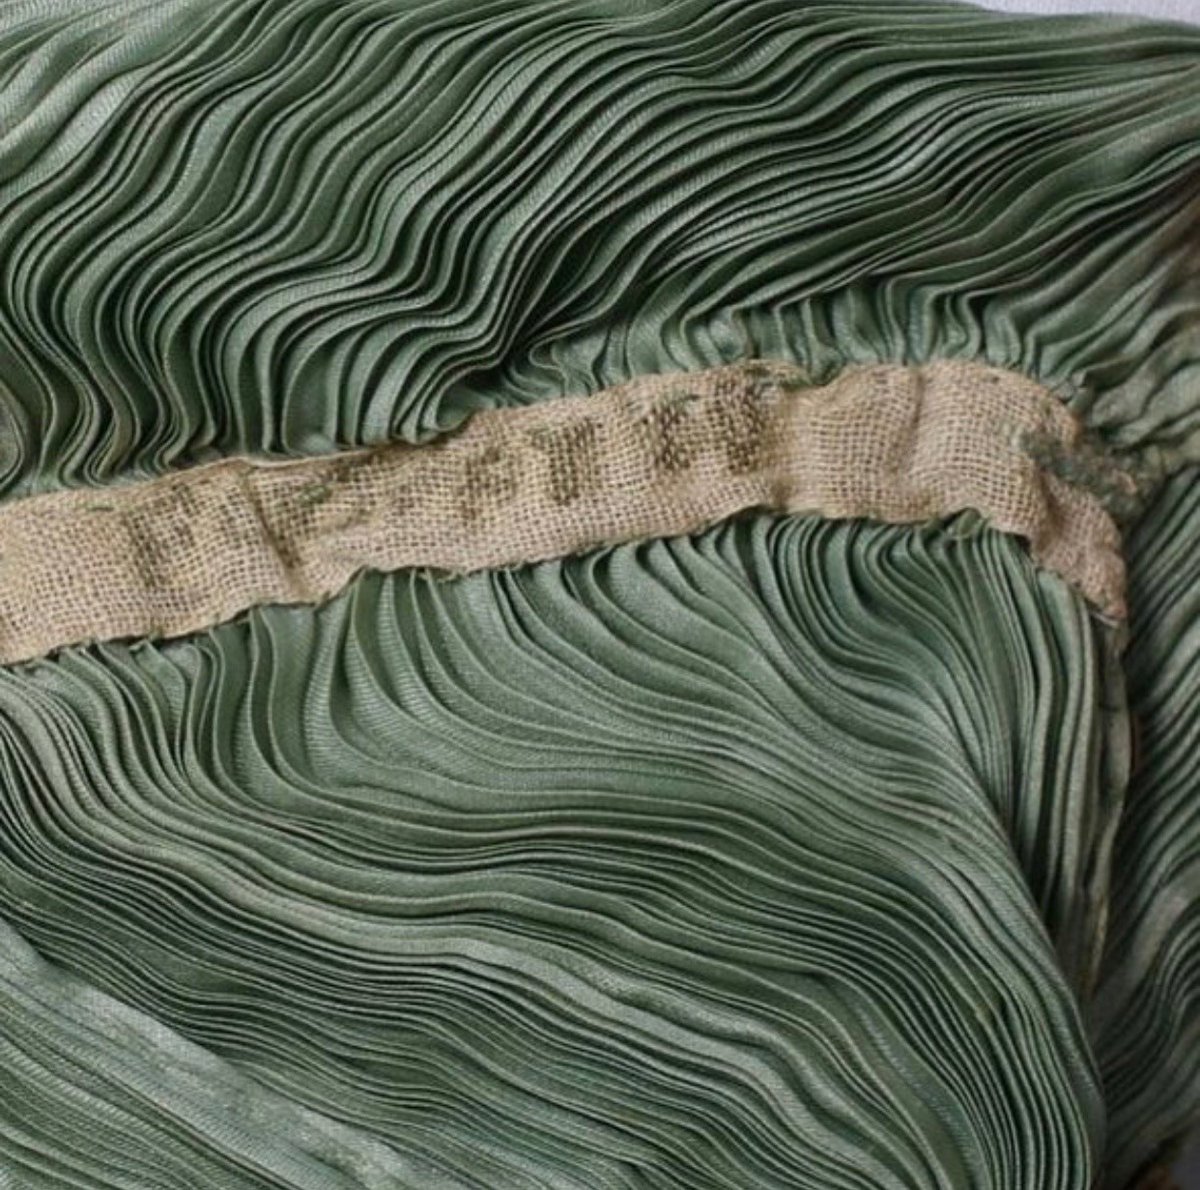 Fortuny was famous for his pleated Delphos’ gowns inspired by Ancient Greece. Even today, we still don’t know the exact methods he used to make all those pleats.